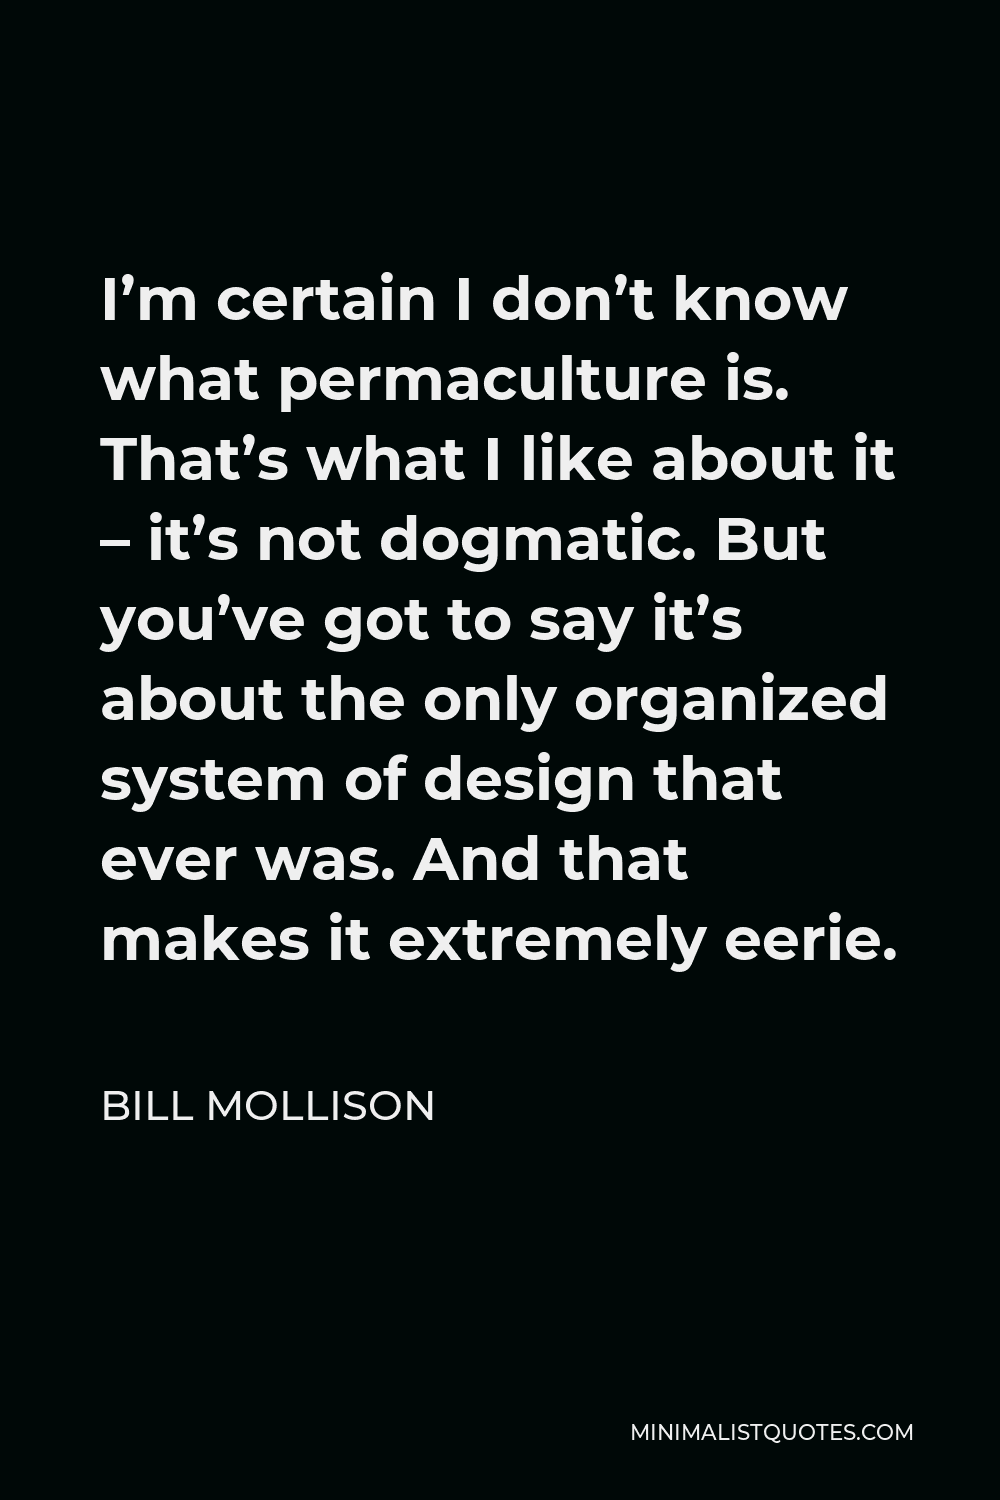 Bill Mollison Quote - I’m certain I don’t know what permaculture is. That’s what I like about it – it’s not dogmatic. But you’ve got to say it’s about the only organized system of design that ever was. And that makes it extremely eerie.